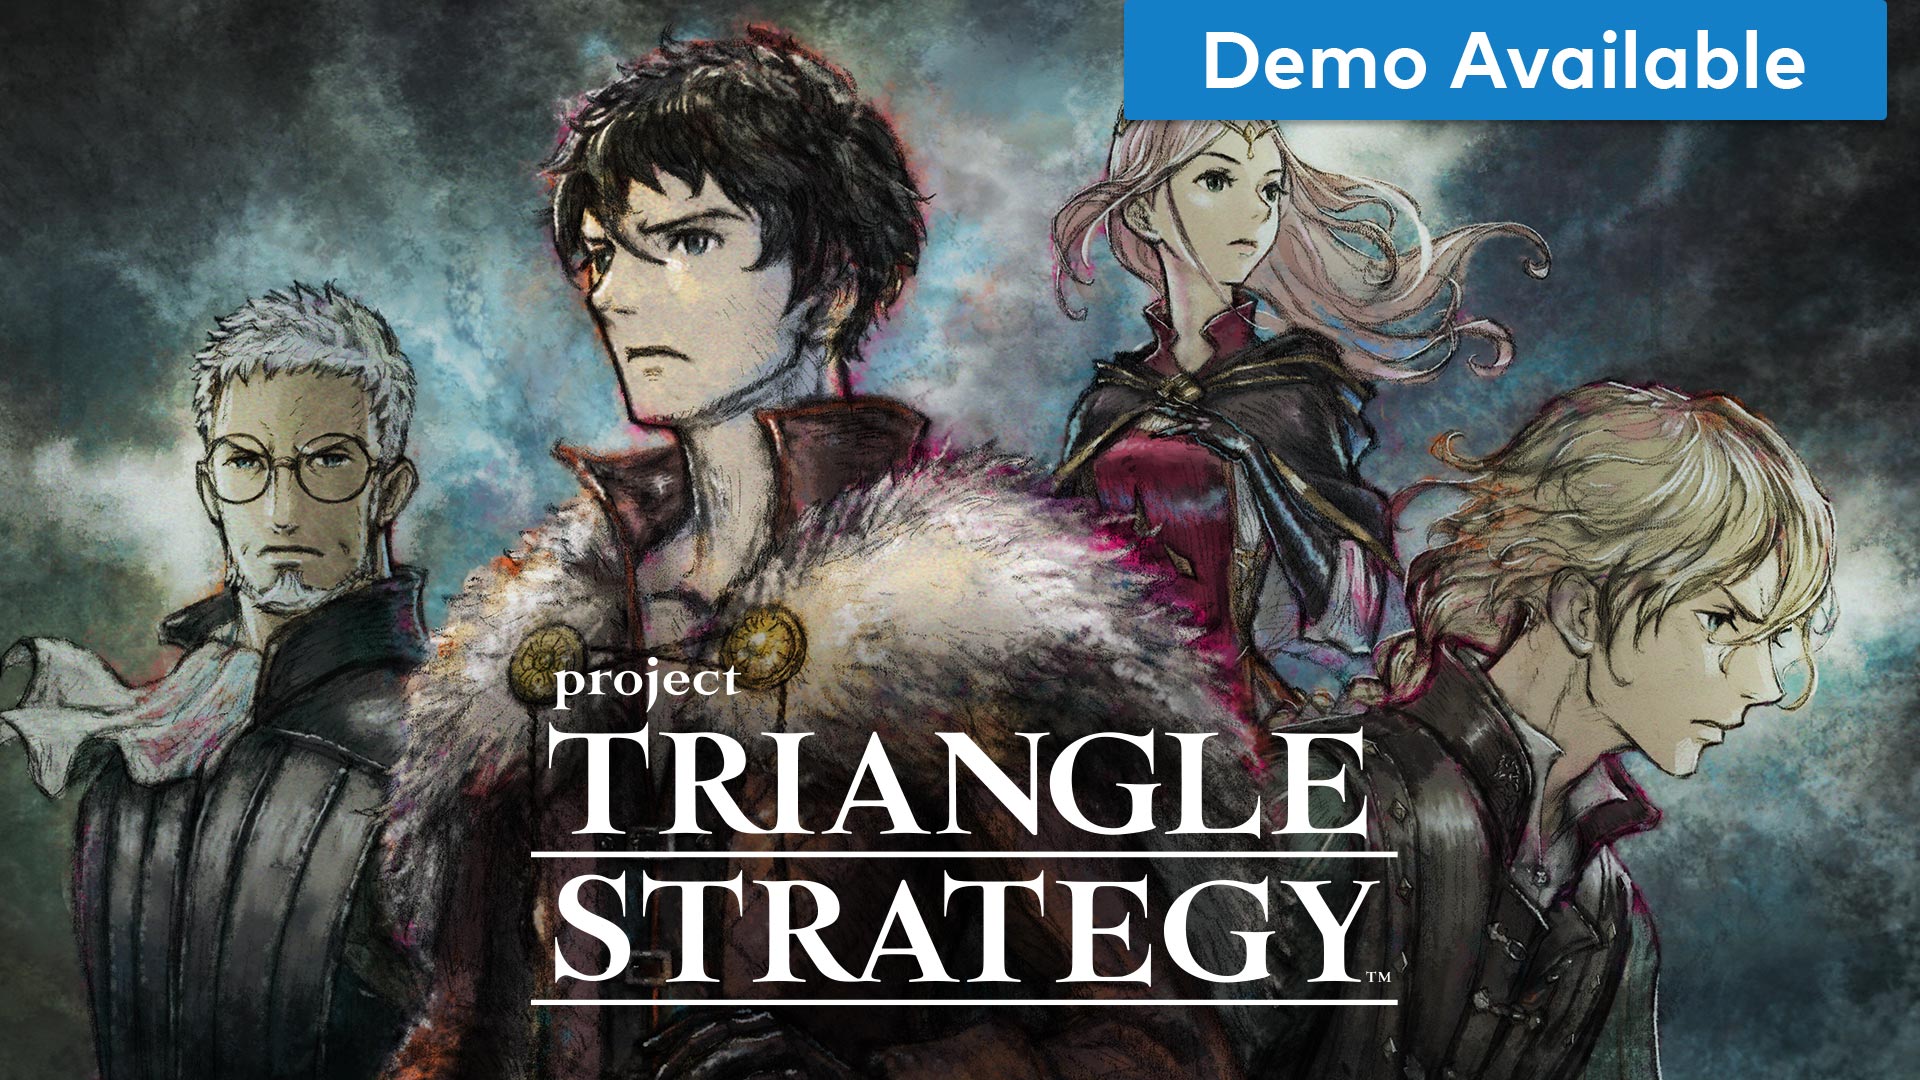 Project TRIANGLE STRATEGY™ Debut Demo